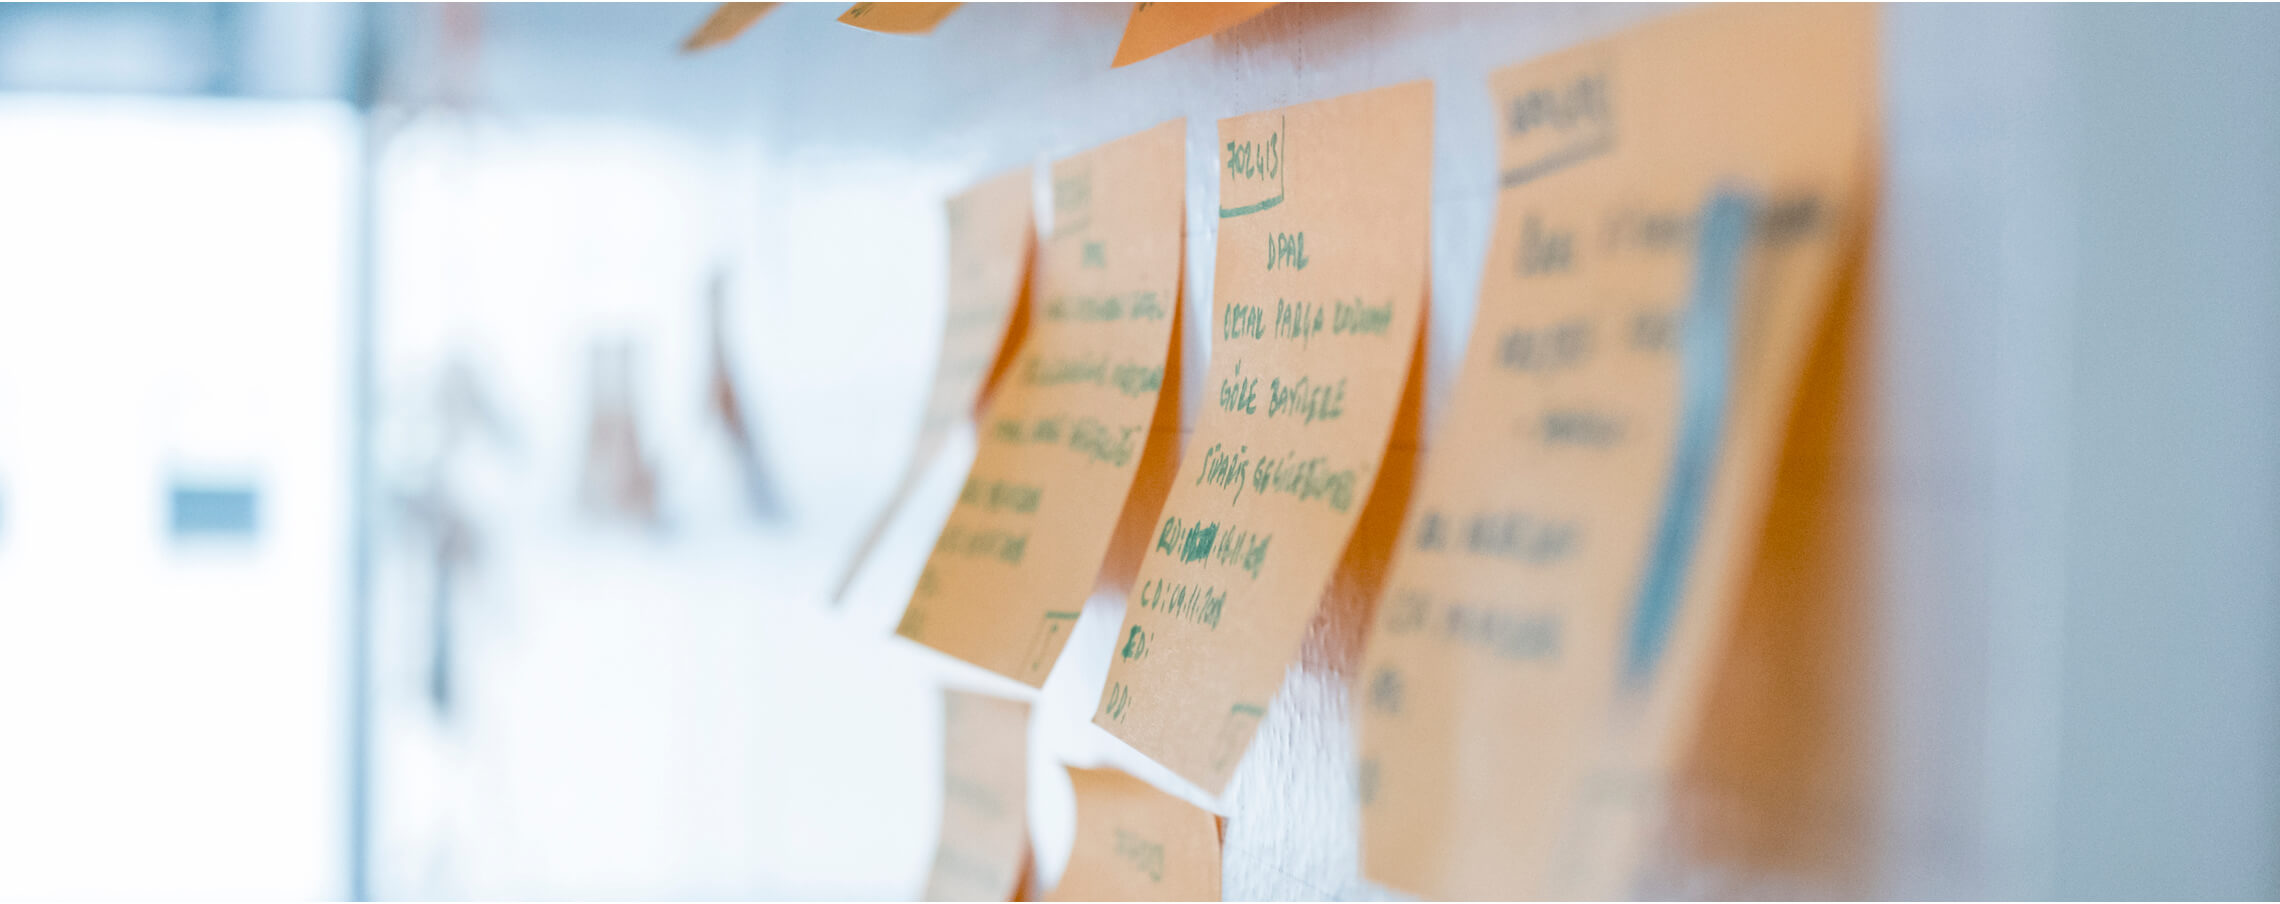 sticky notes on a wall, portraying strategy